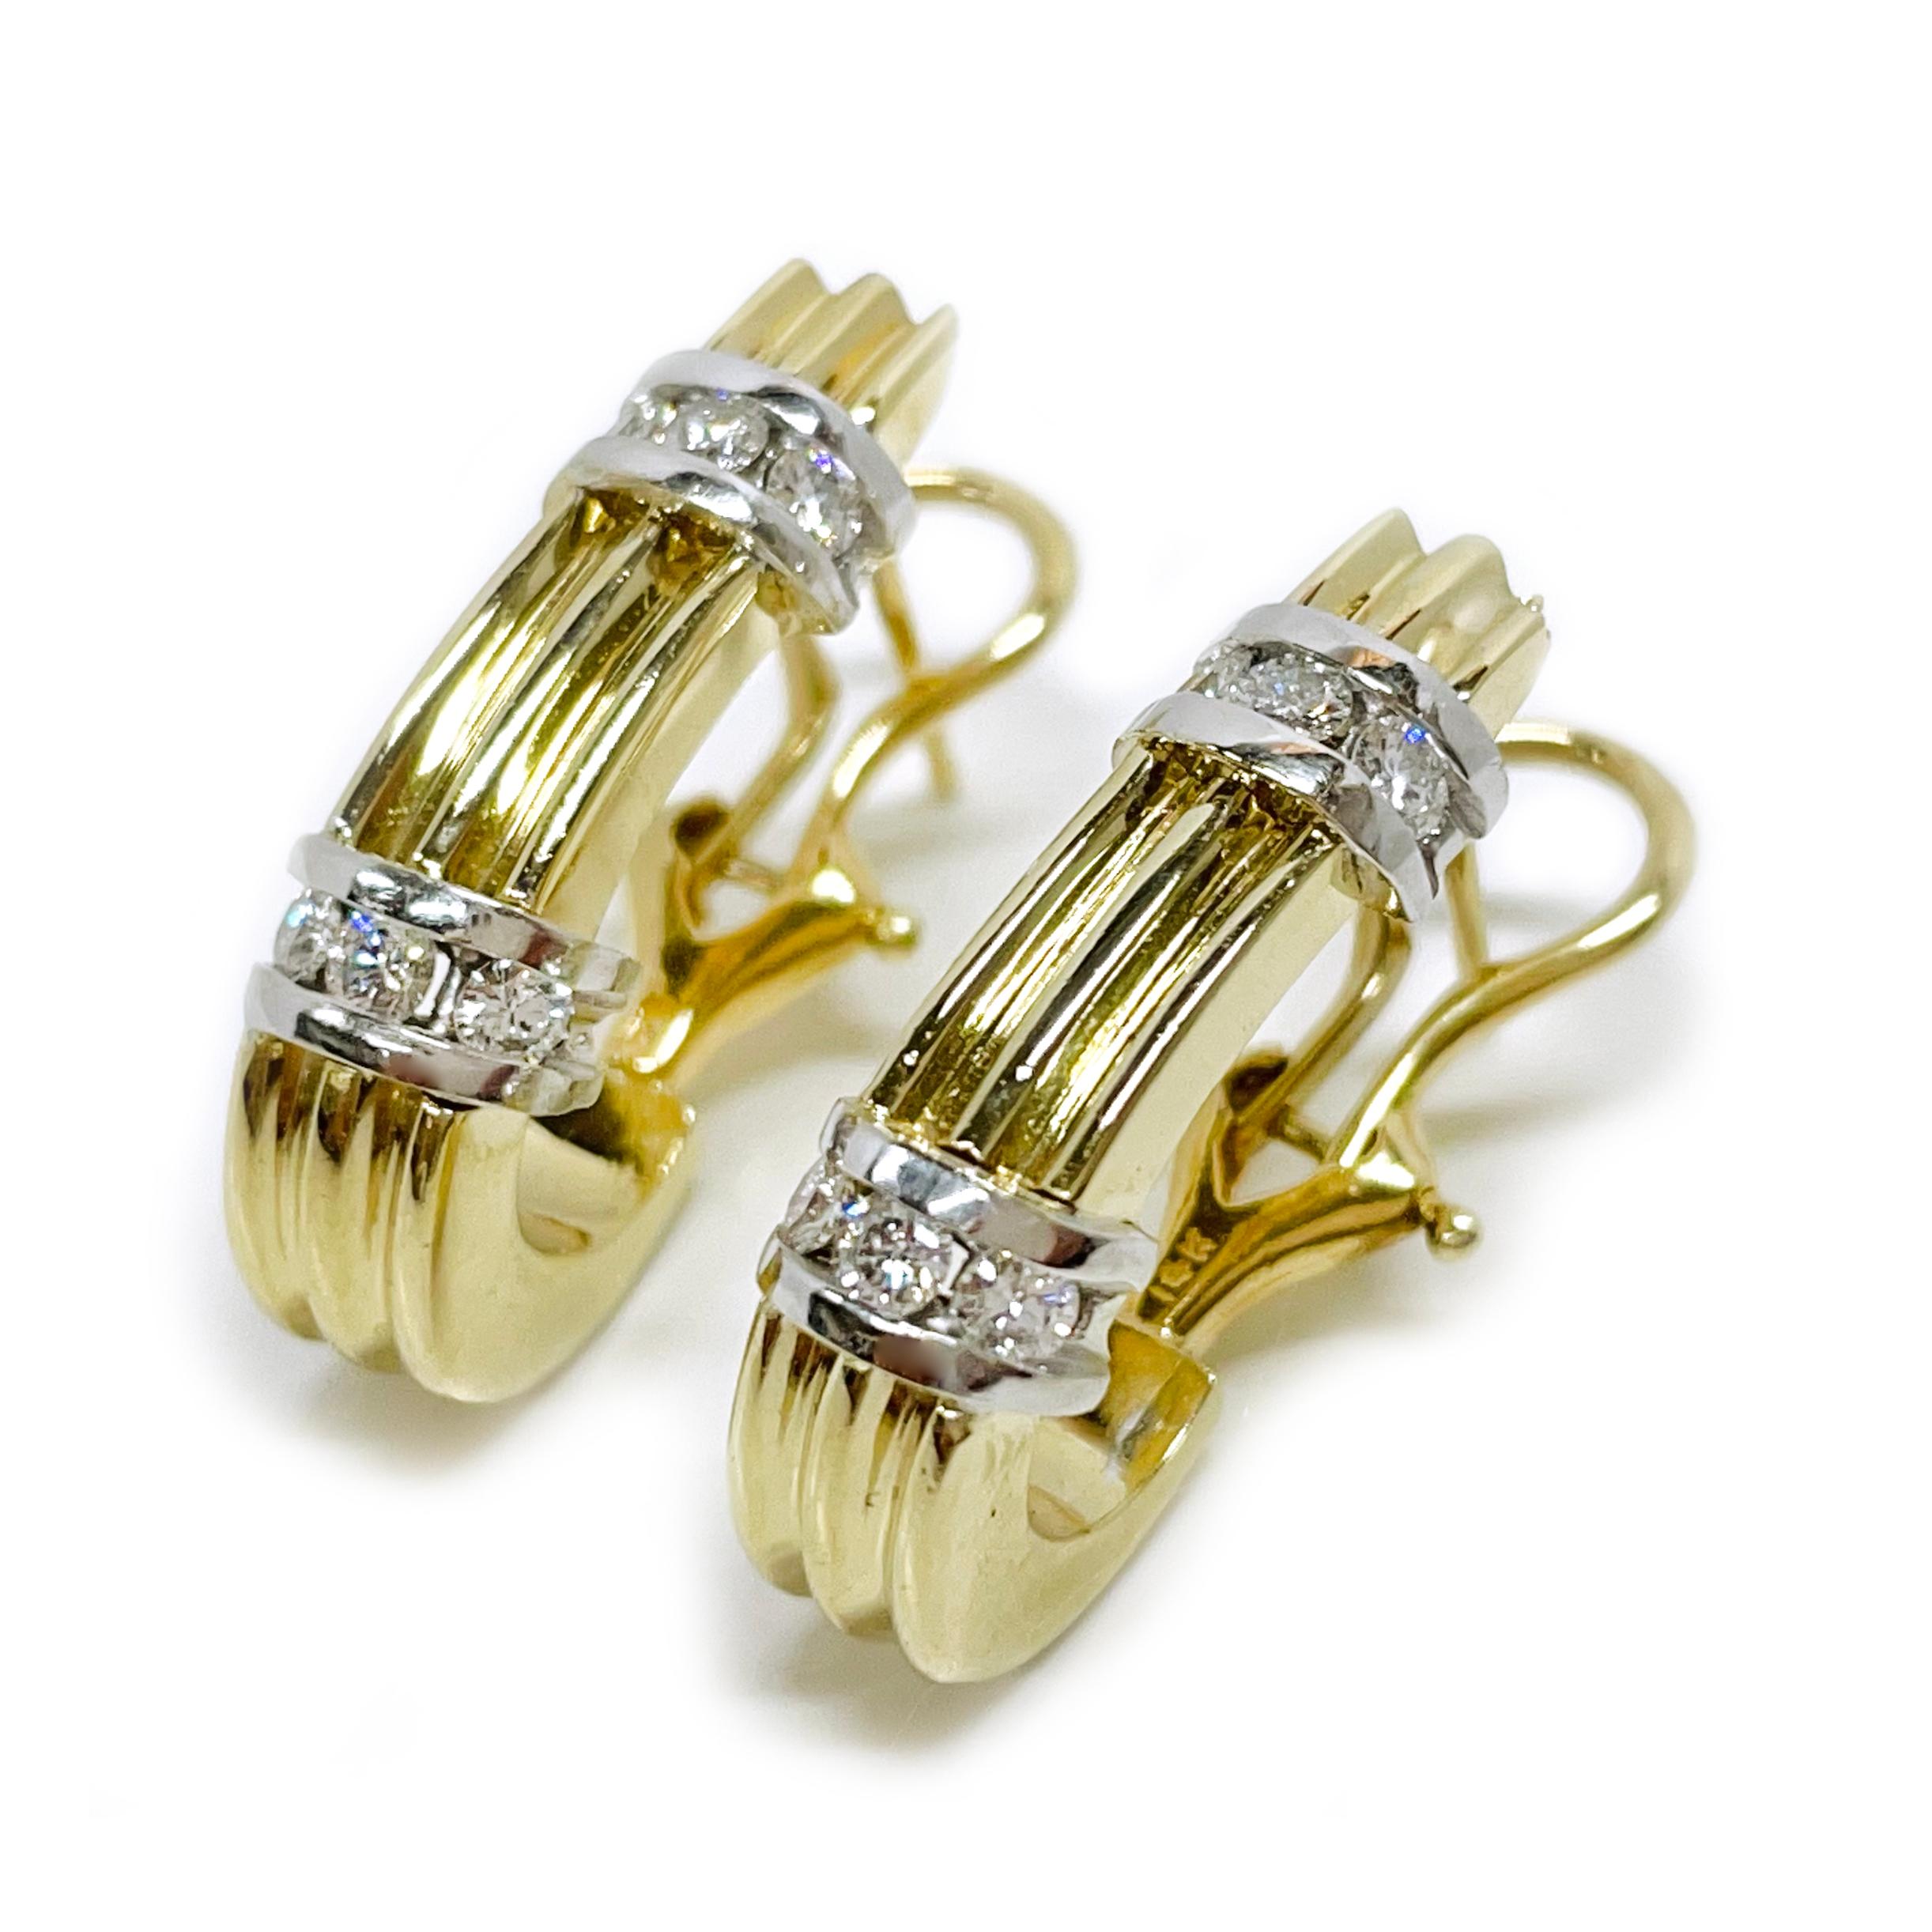 14 Karat Two-Tone Ridged Diamond Earrings. Each earring features ridged semi-hoop (smooth on the inside) and six-round pave-set diamonds in white gold. The diamonds measure 2.5mm for a total carat weight of 0.60ctw. Each earring measures 6.8mm wide